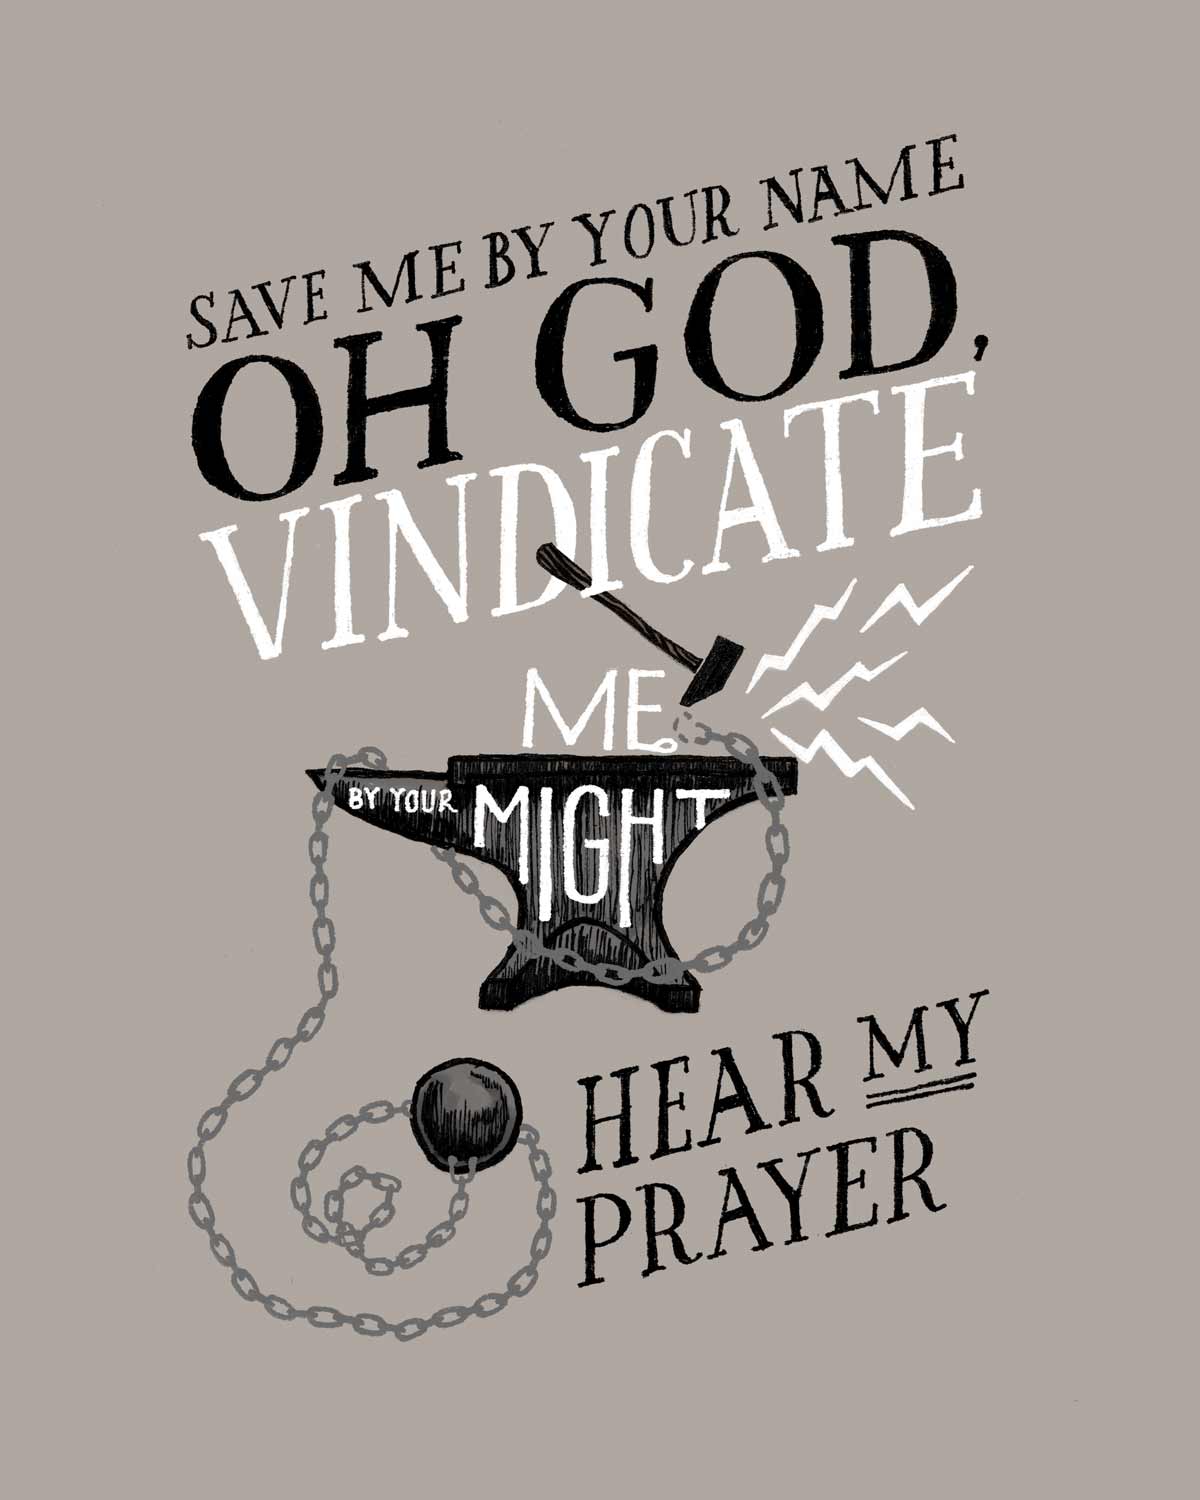 Psalm 54 Hand lettering that reads: Save me by your name oh God. Vindicate me by your might. Hear my prayer. Illustration of a hammer breaking a chain on an anvil